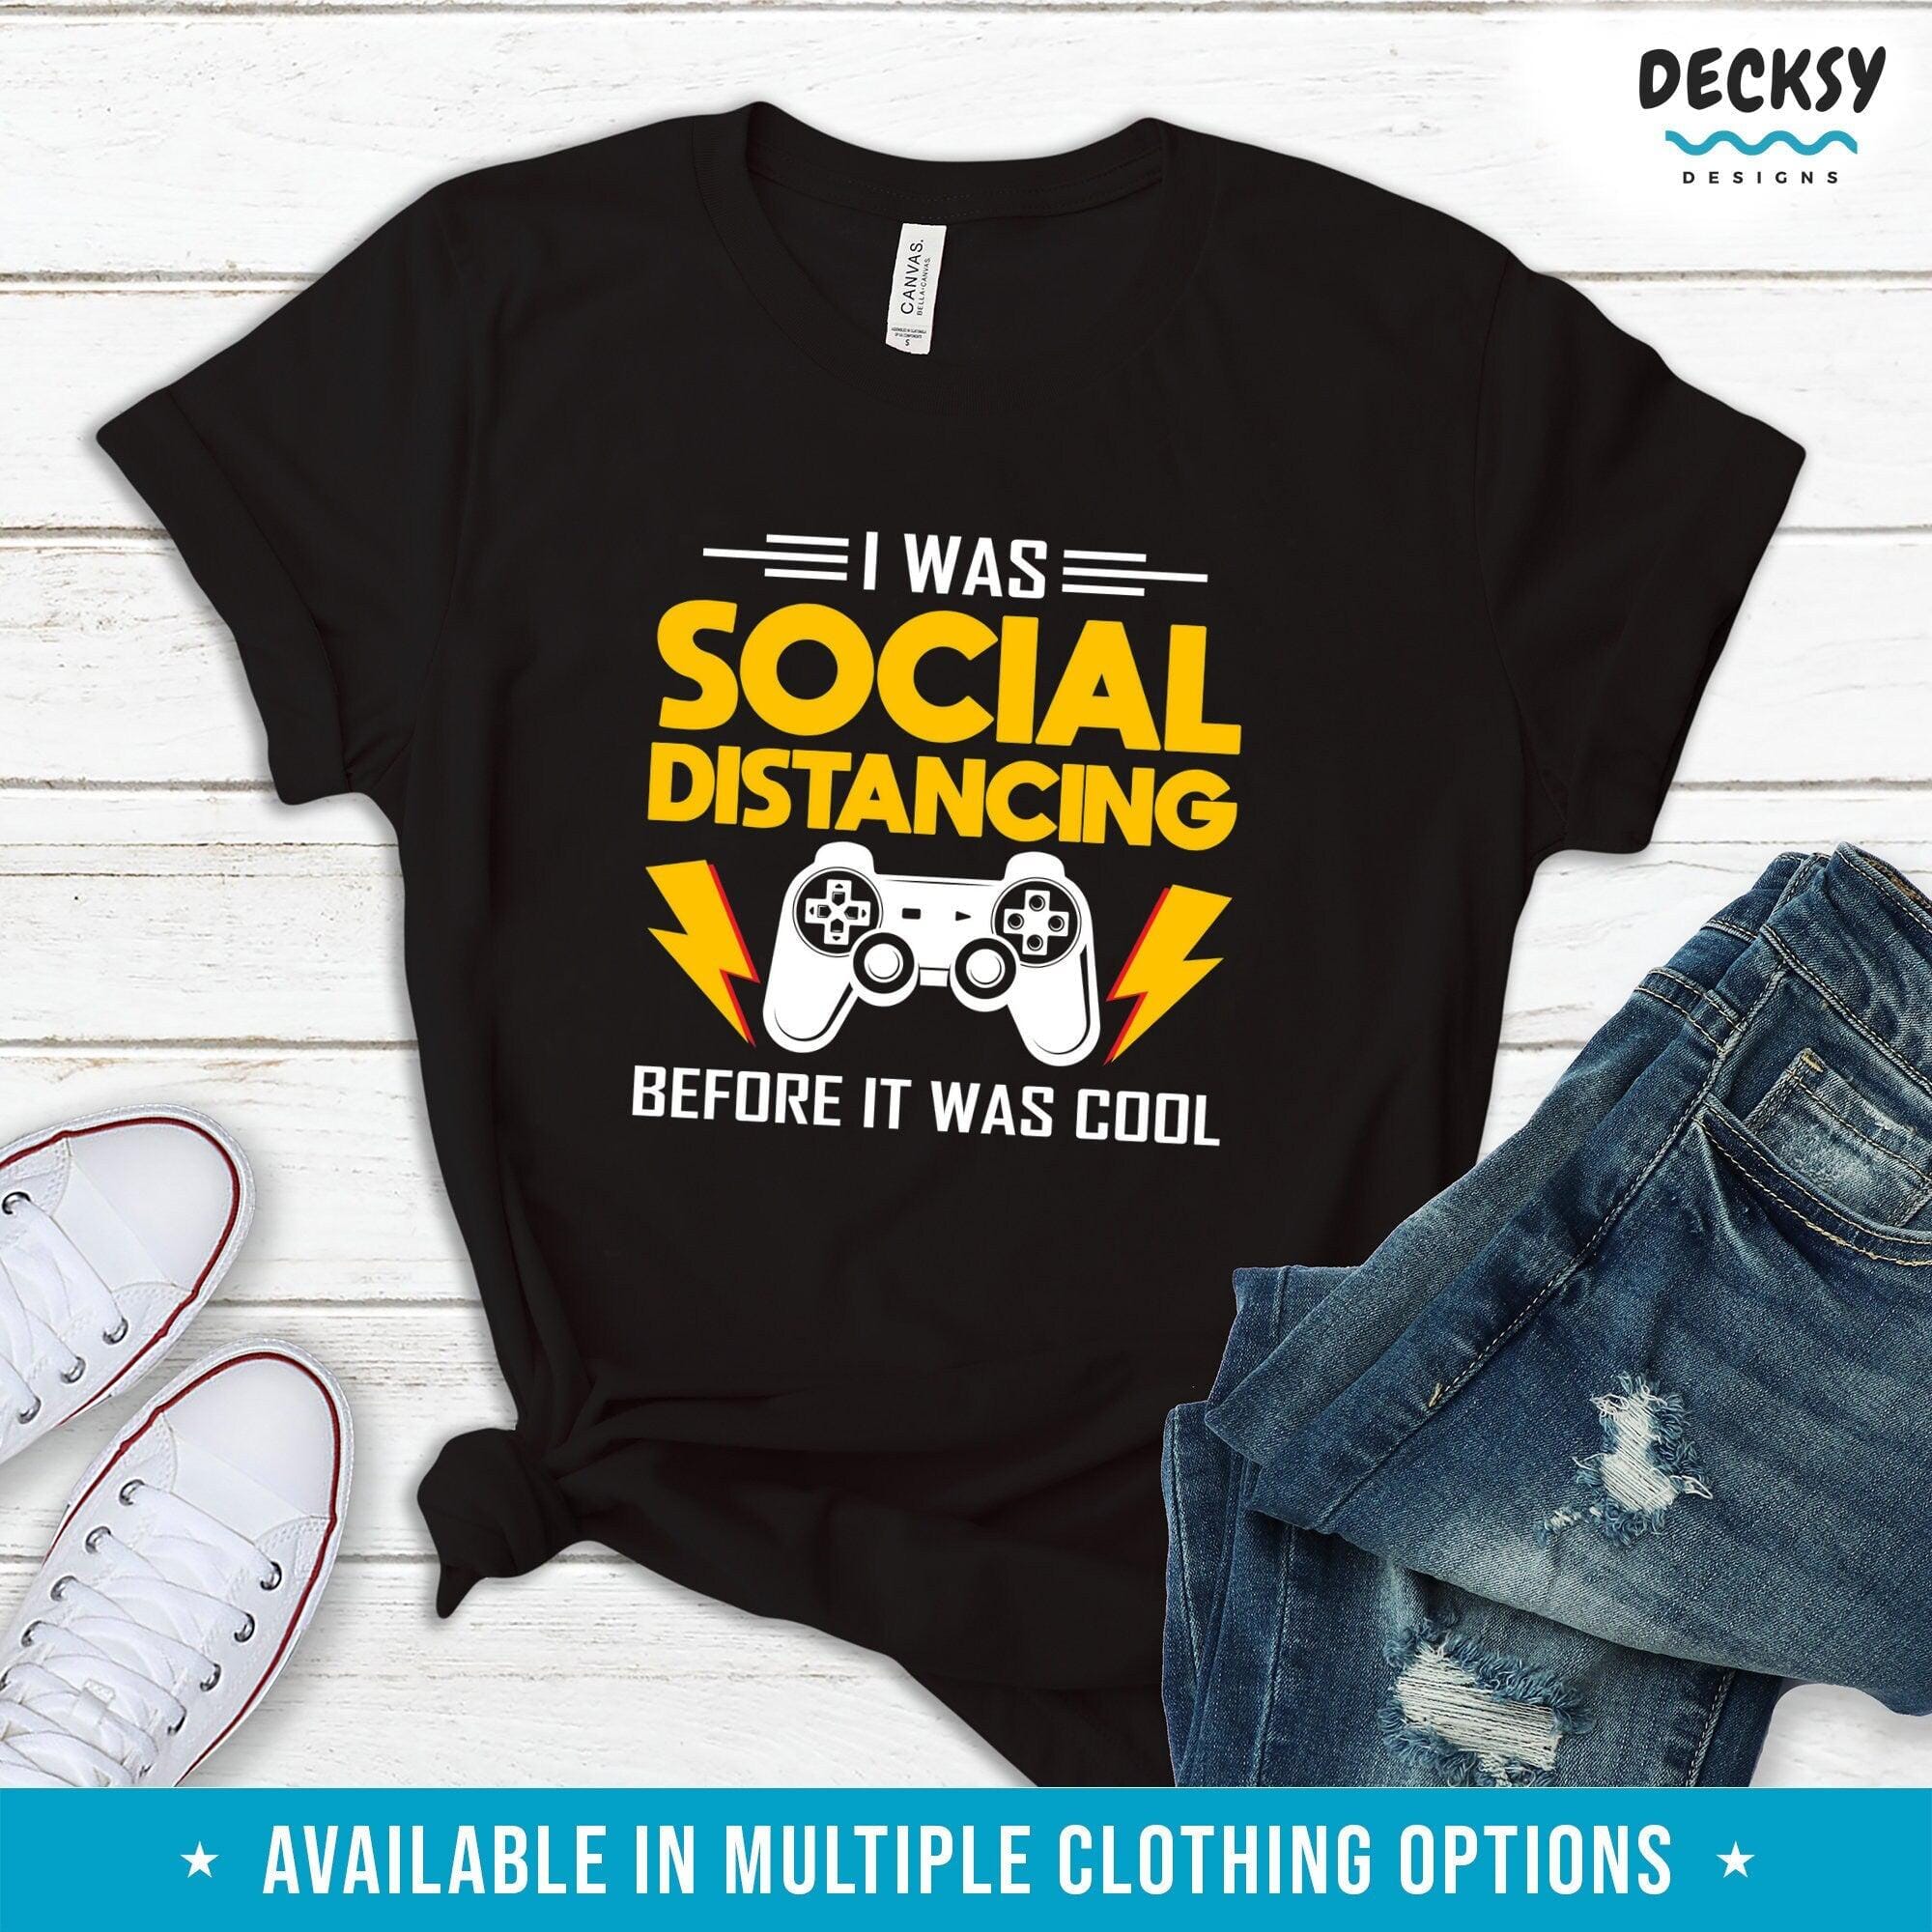 Video Game Shirt, Gamer Gift Funny-Clothing:Gender-Neutral Adult Clothing:Tops & Tees:T-shirts:Graphic Tees-DecksyDesigns